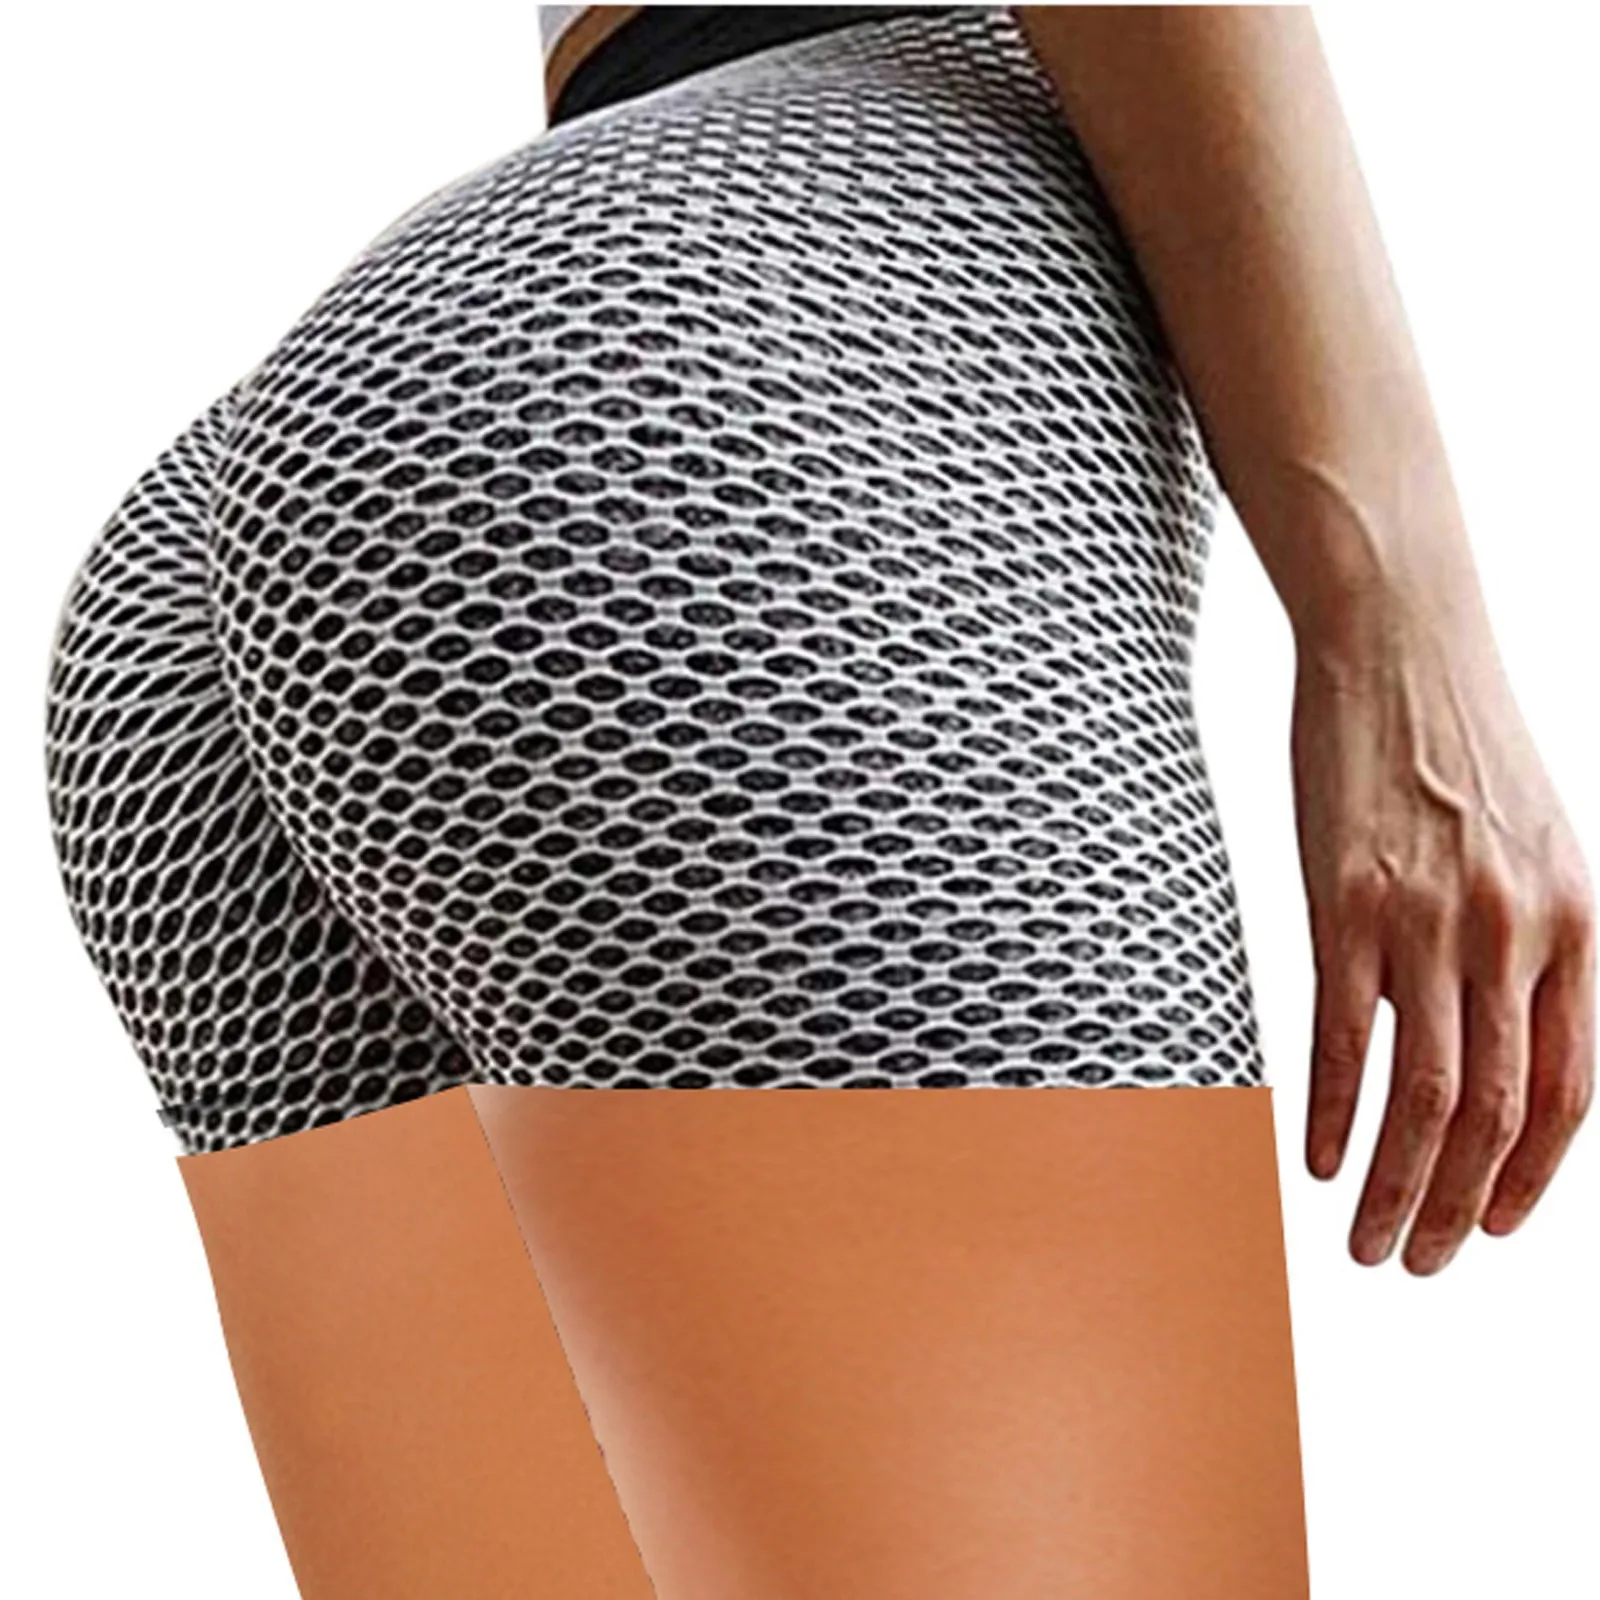 Shorts For Women Honeycomb Yoga Peach Buttocks Yoga Fitness Workout Shorts Running Tights Short